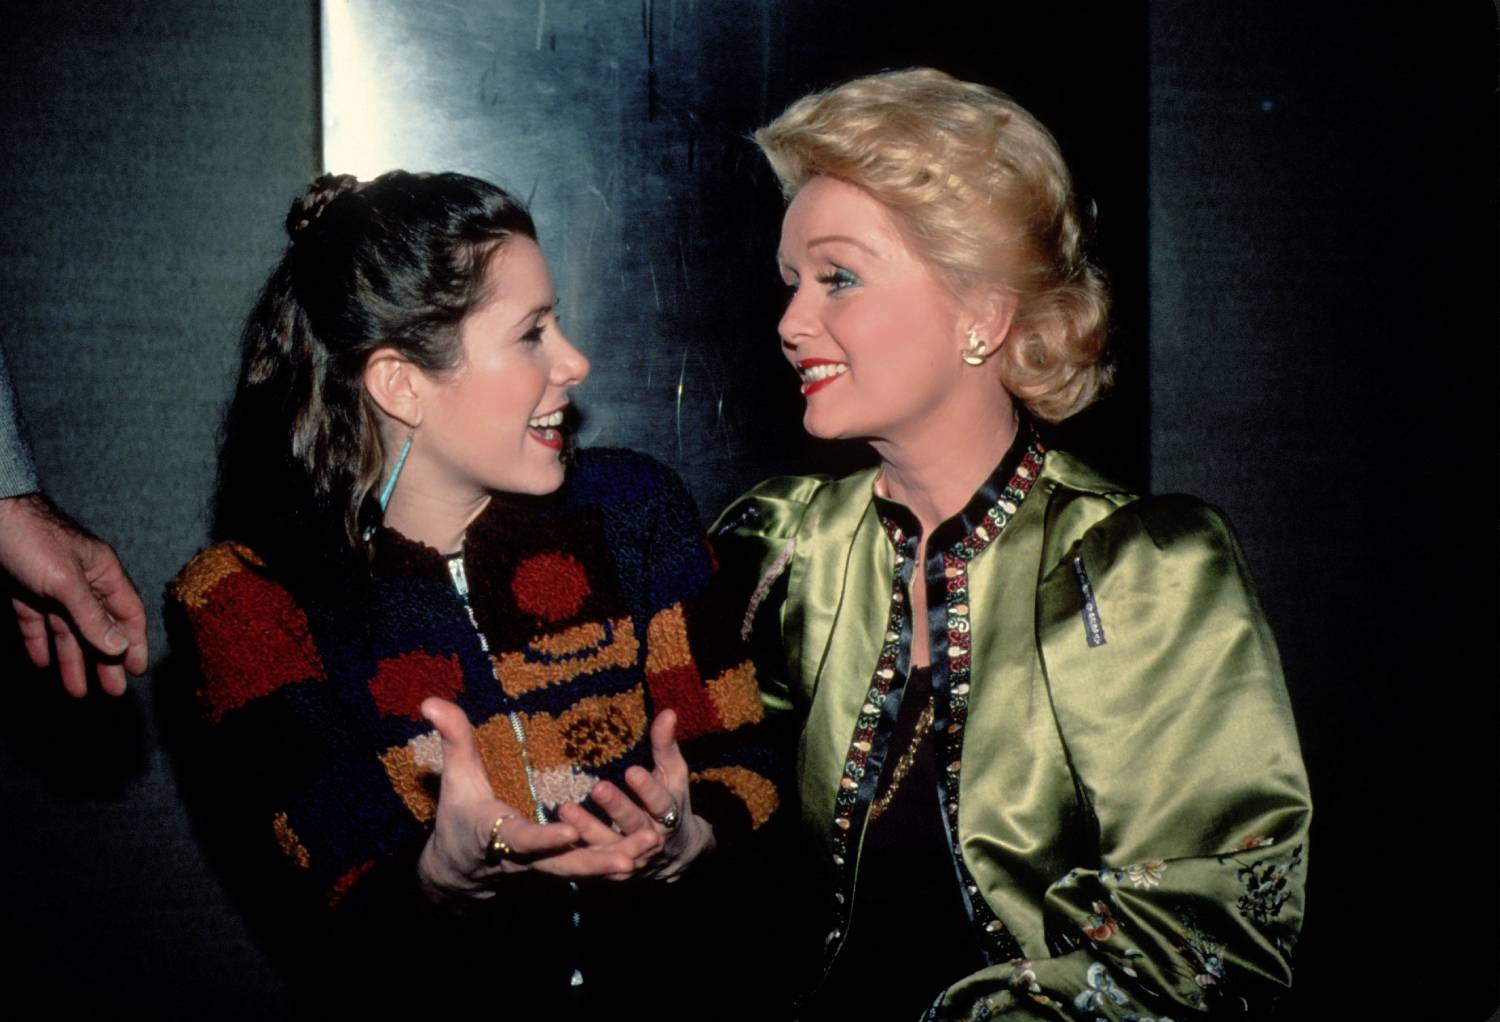 NEW YORK - CIRCA 1983: Carrie Fisher and Debbie Reynolds circa 1983 in New York City.